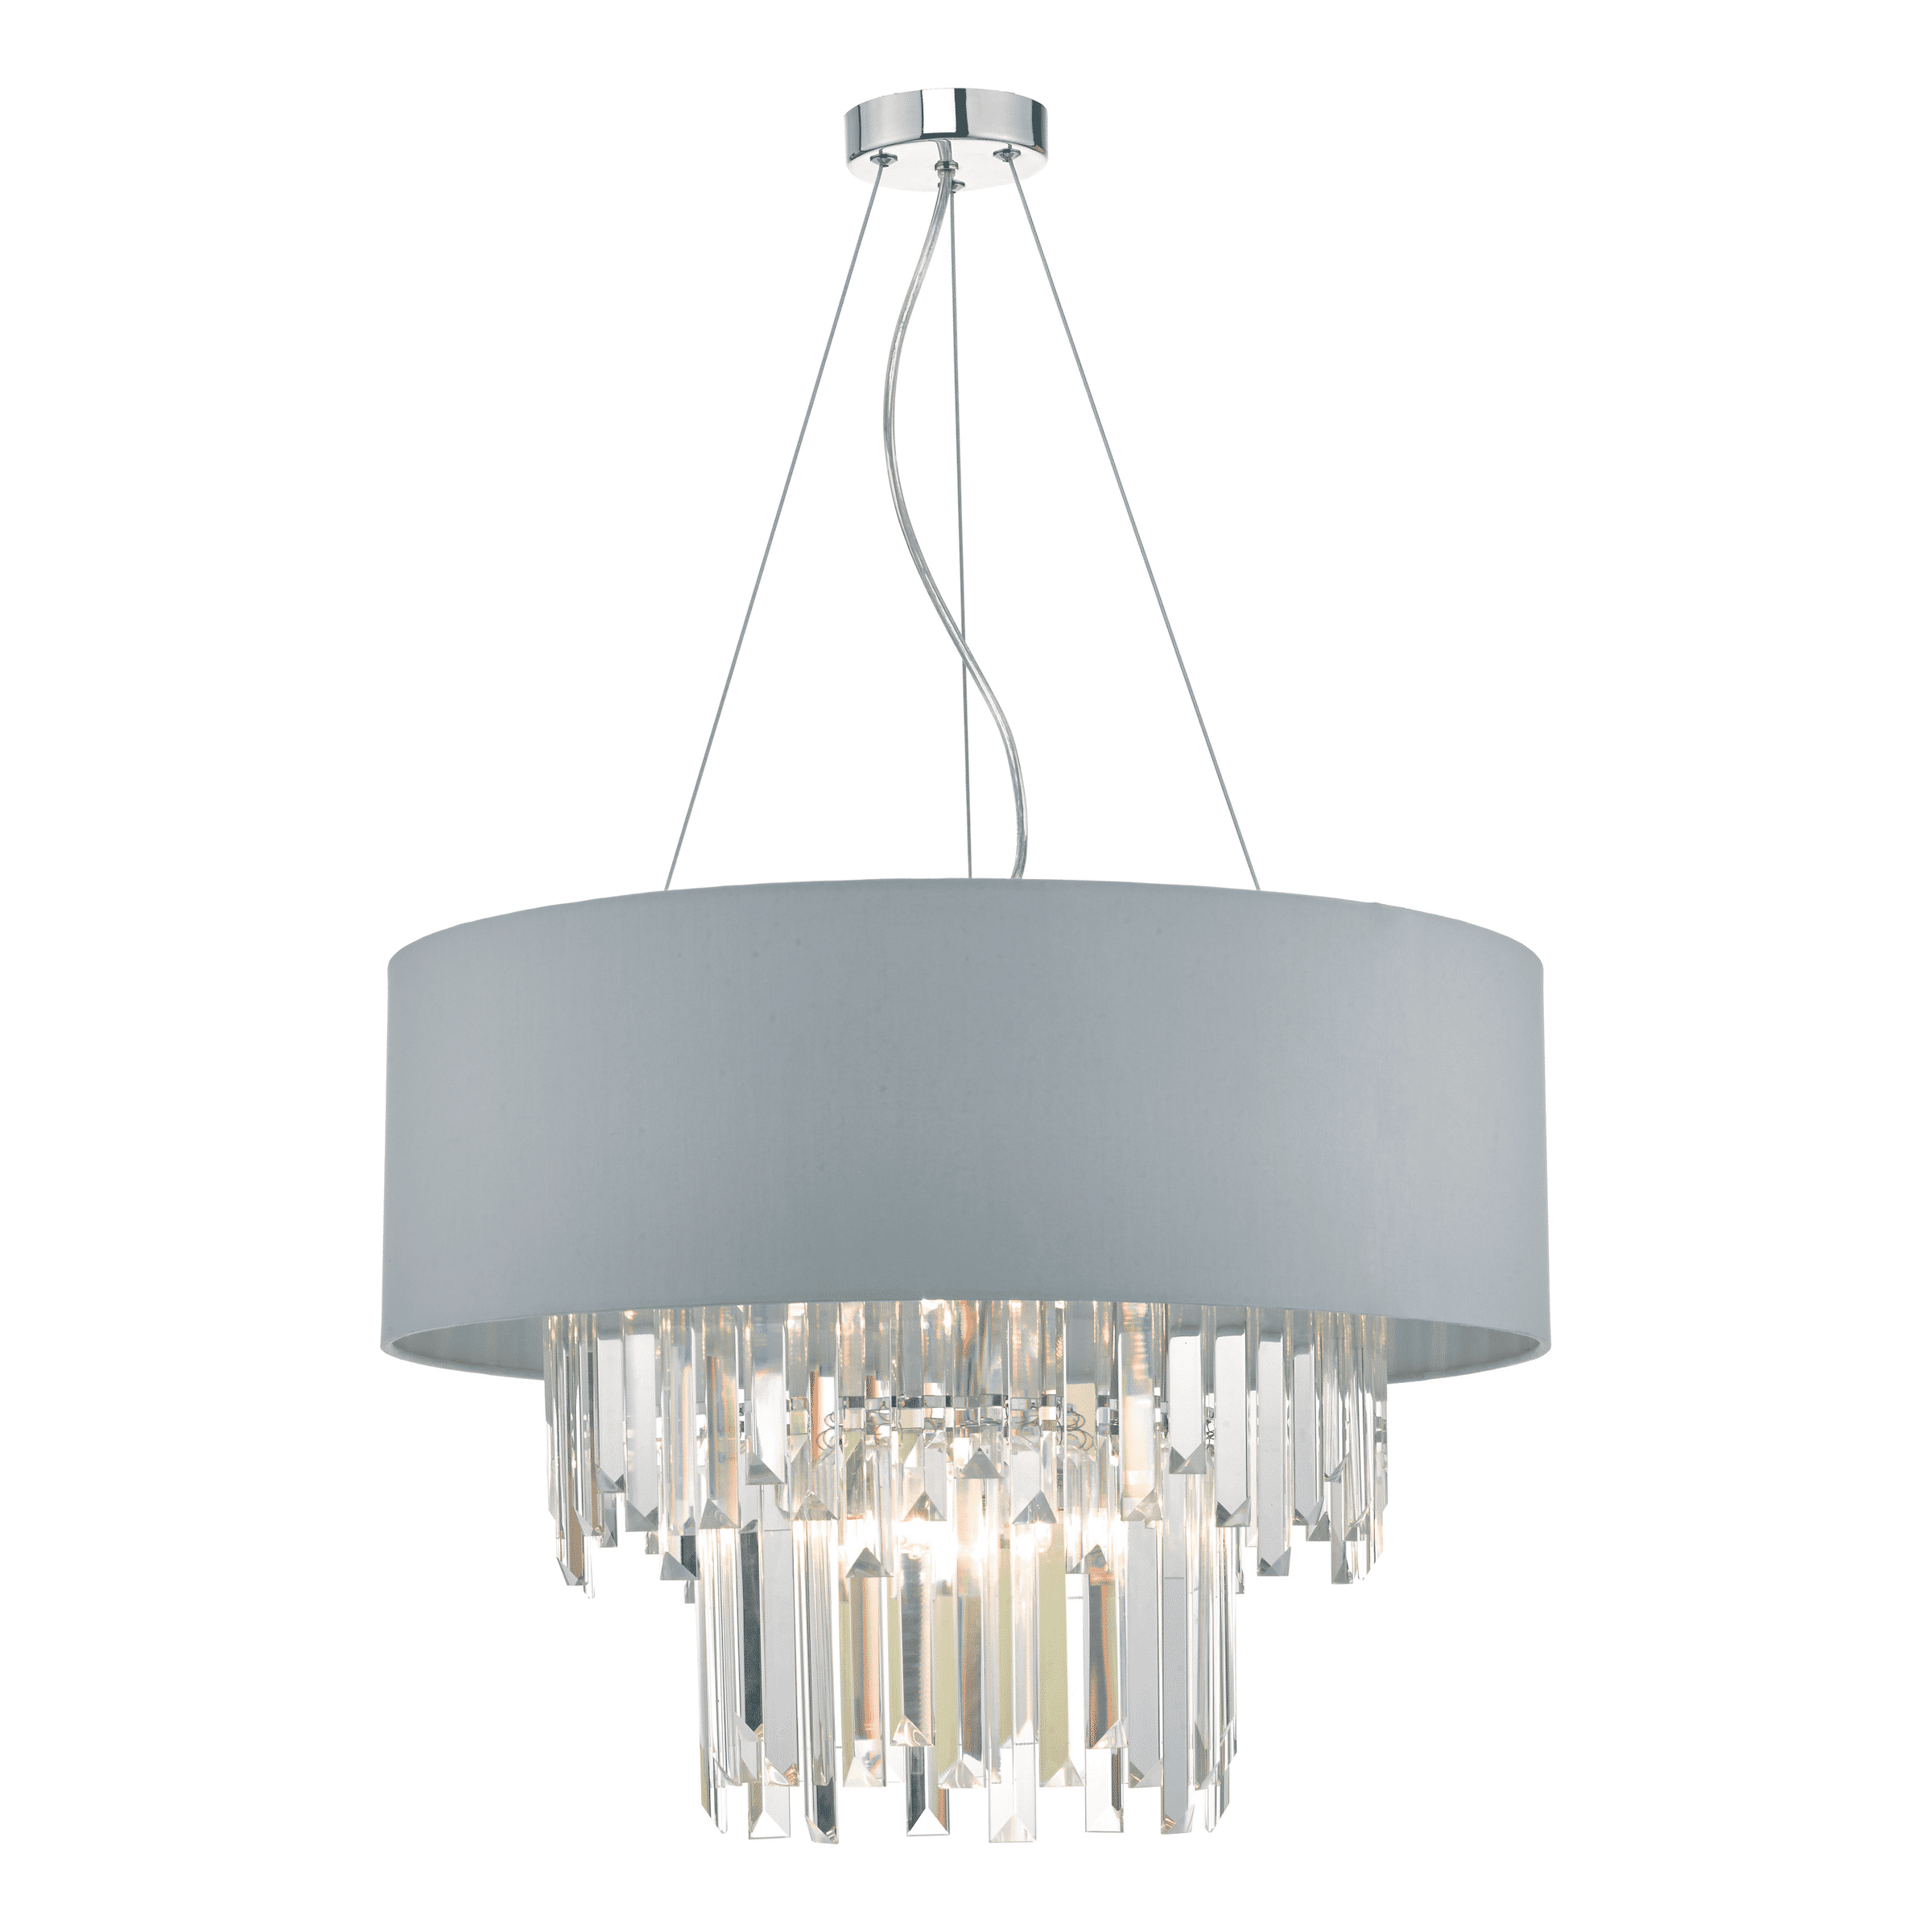 6 Light Pendant Ceiling Light With Grey Shade